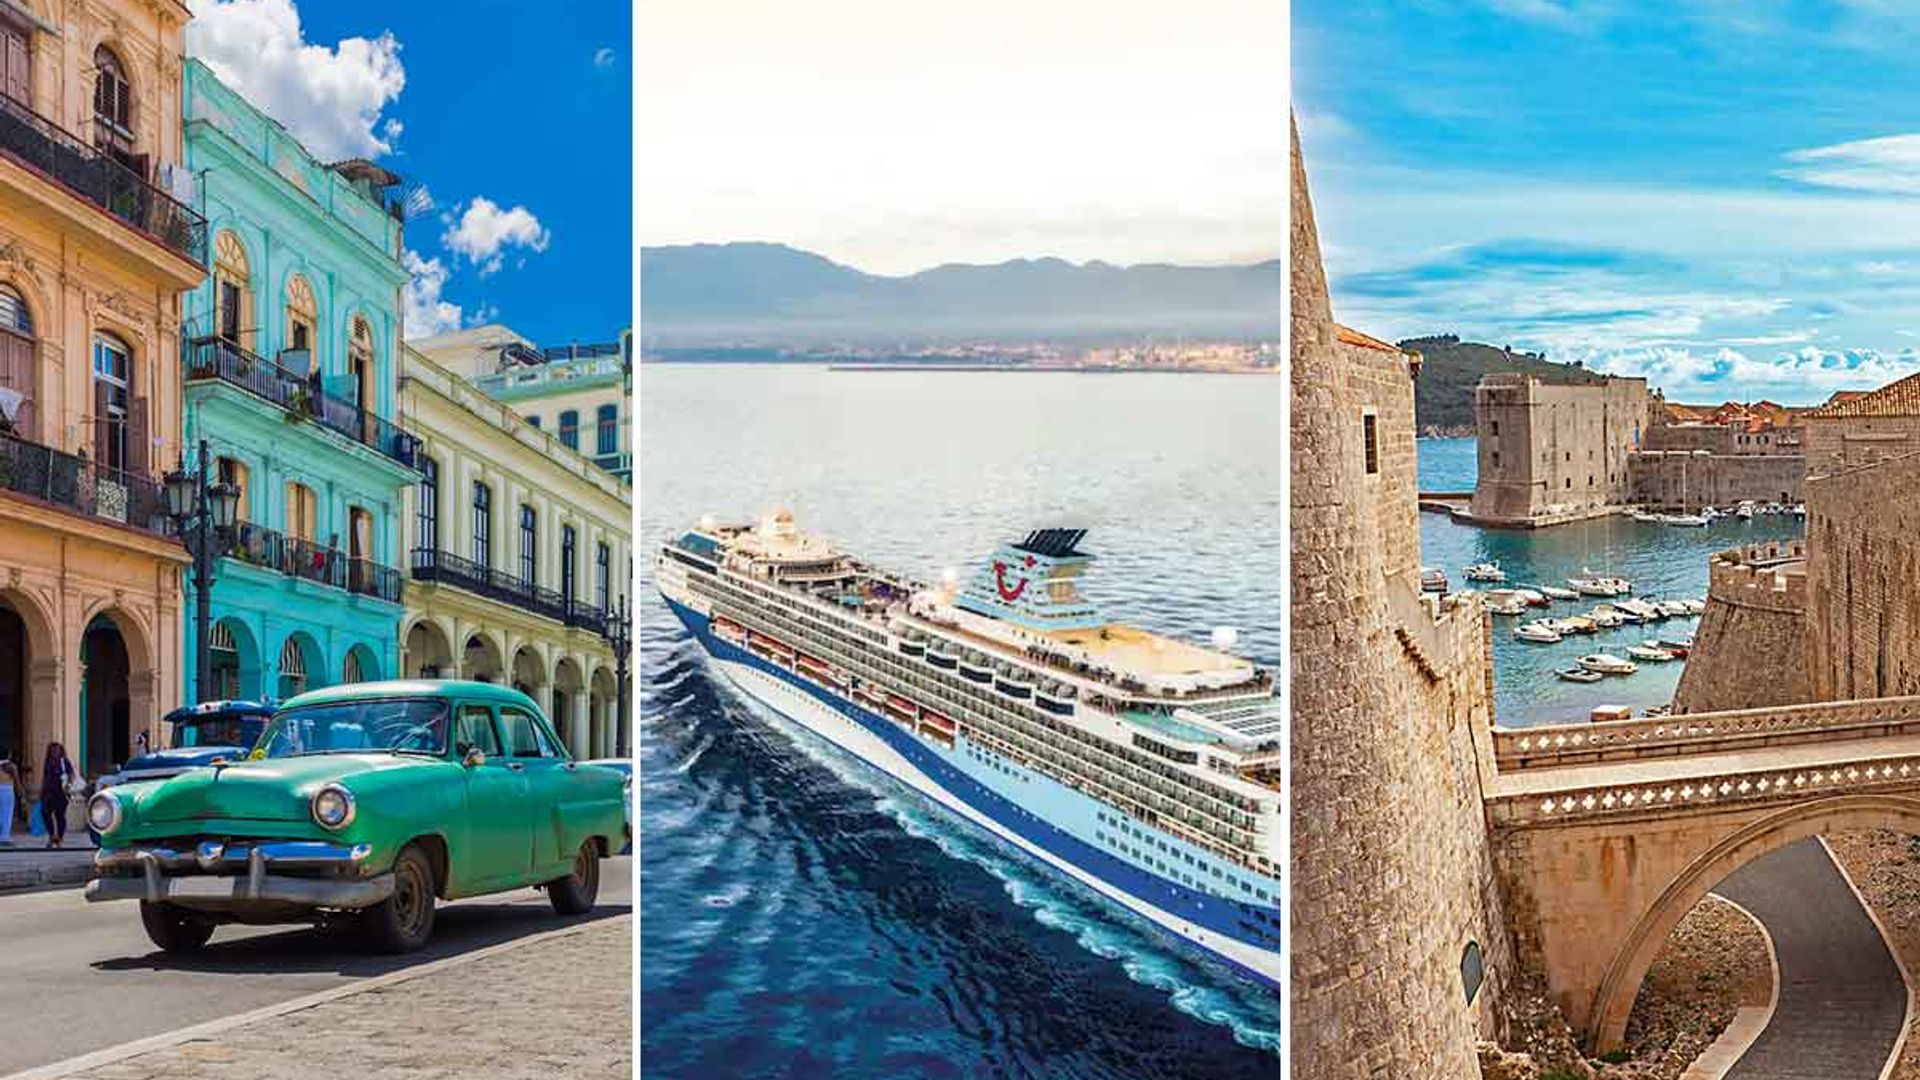 TUI's Marella Cruises are the hot holiday ticket of 2022 - here's their best cruise destinations